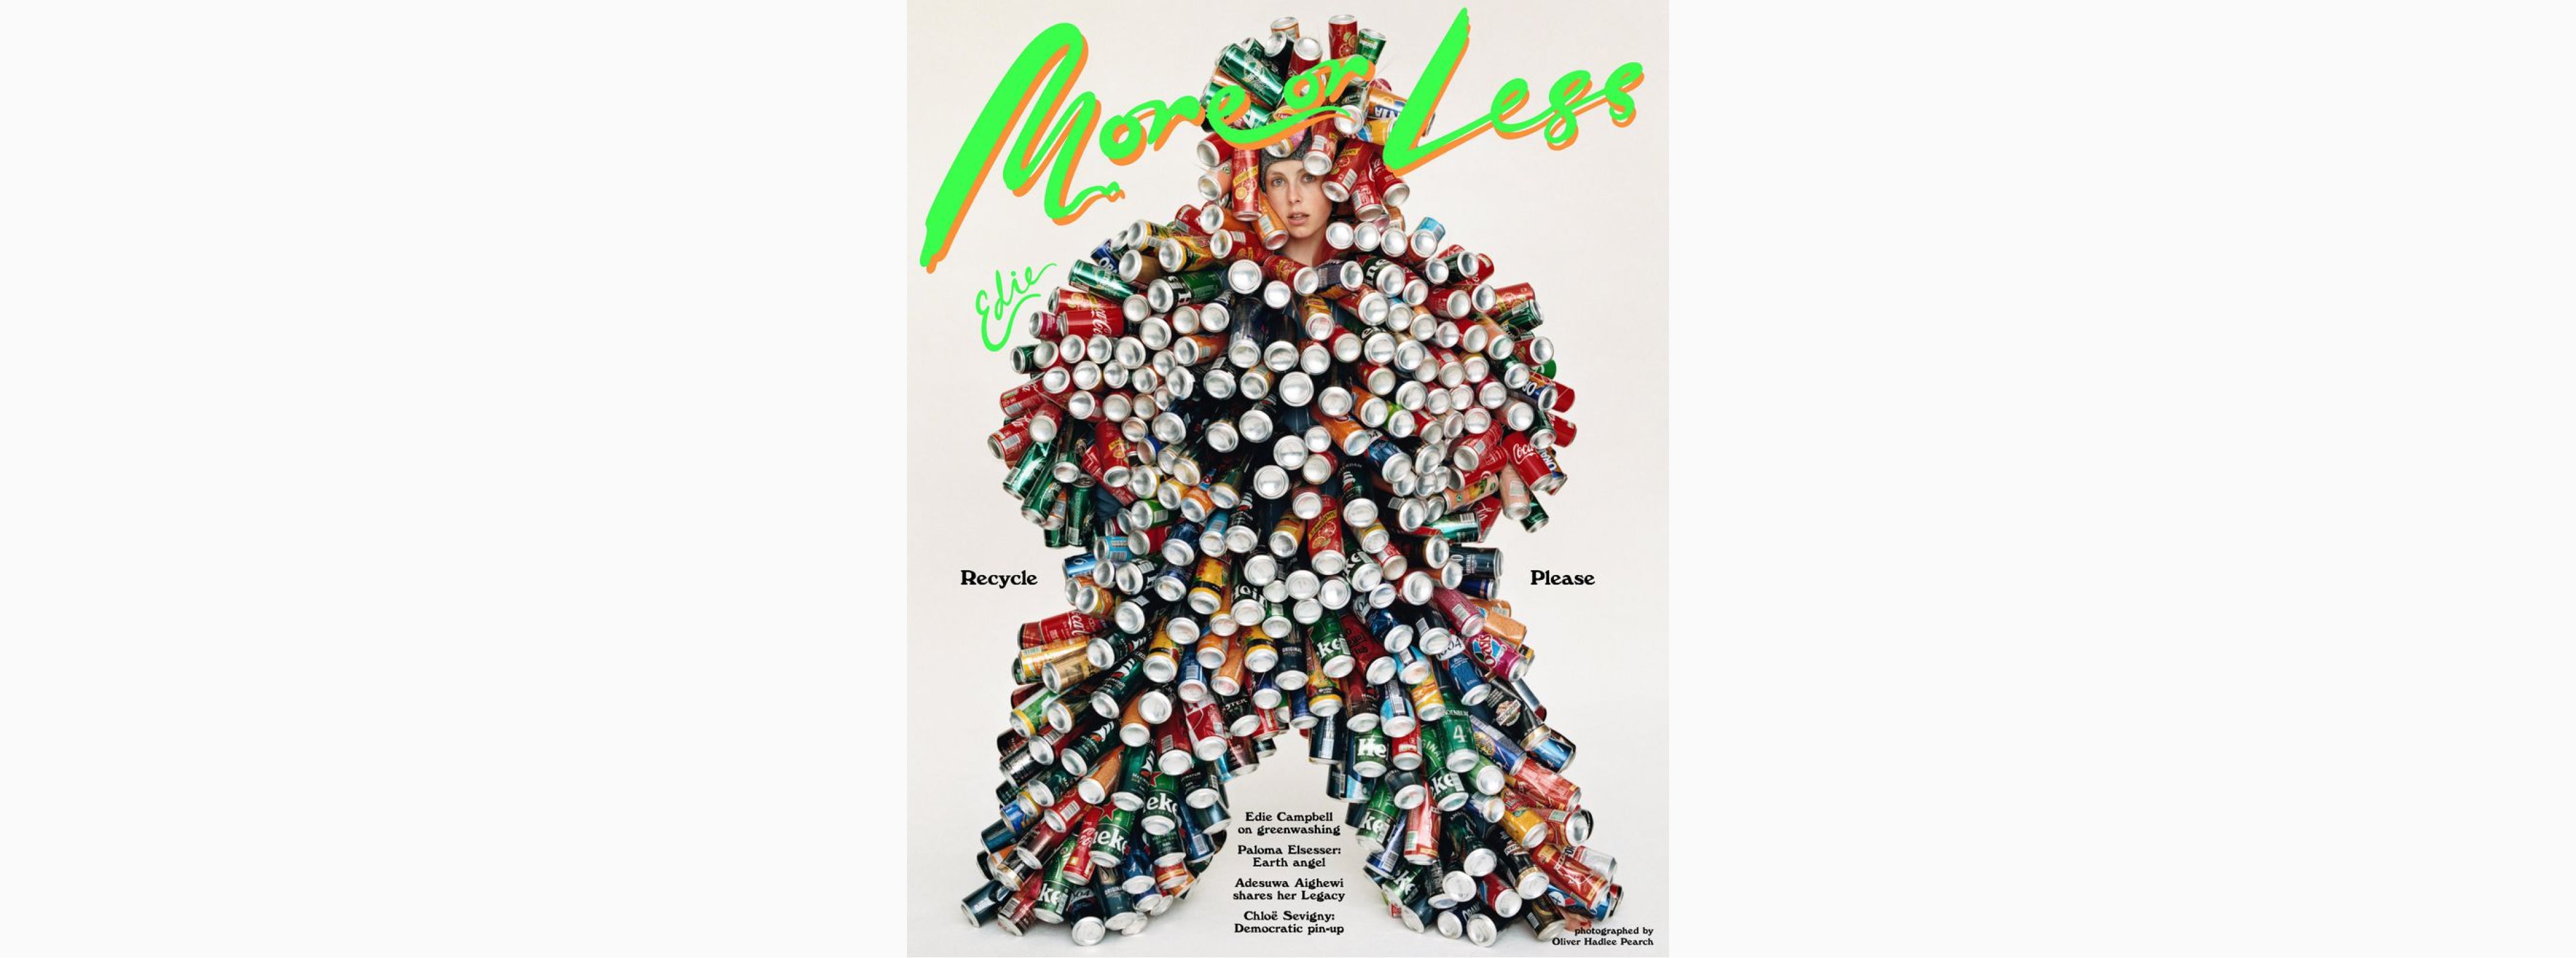 More or Less Mag